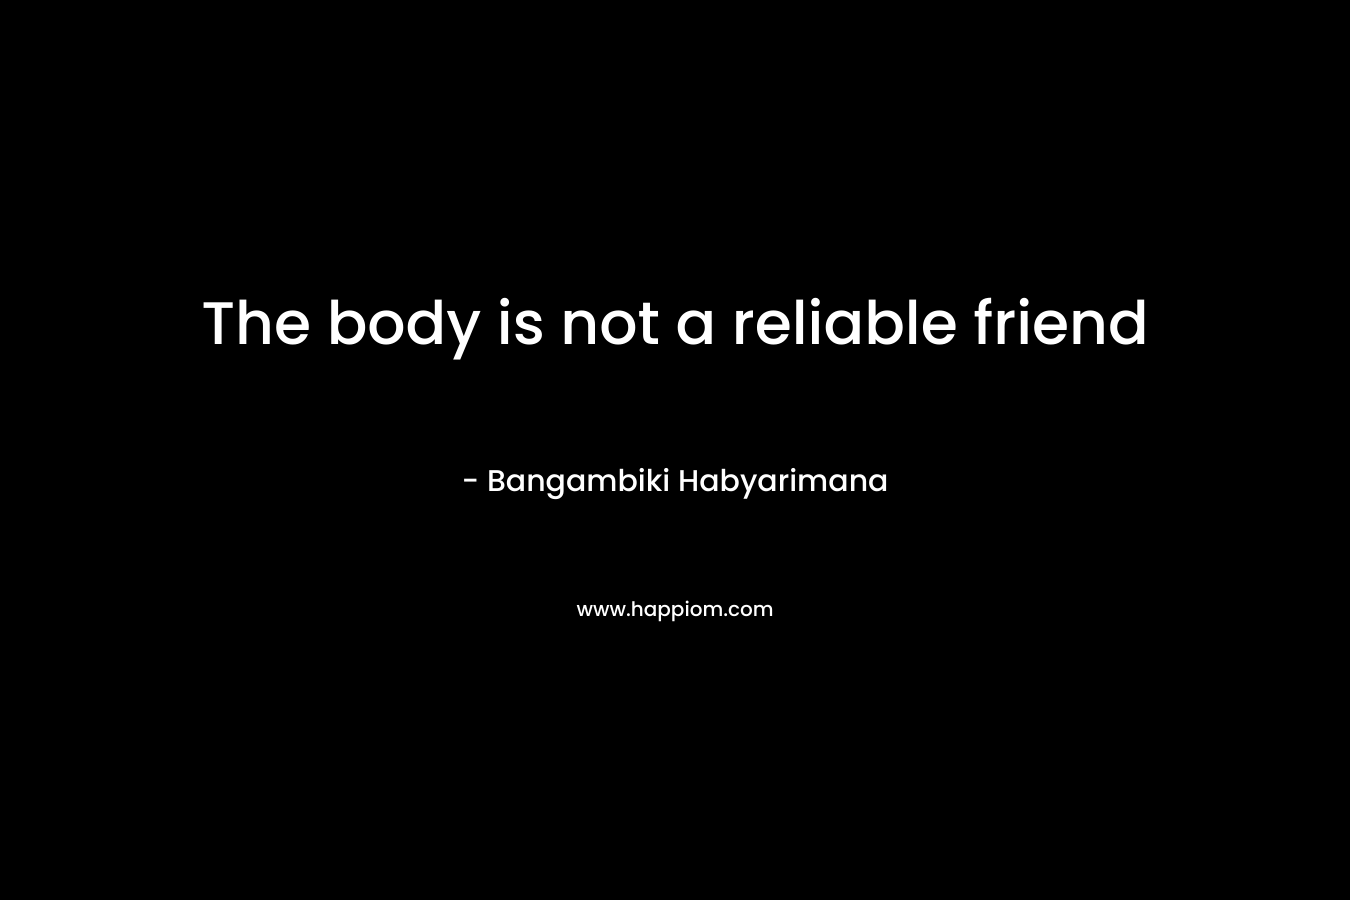 The body is not a reliable friend